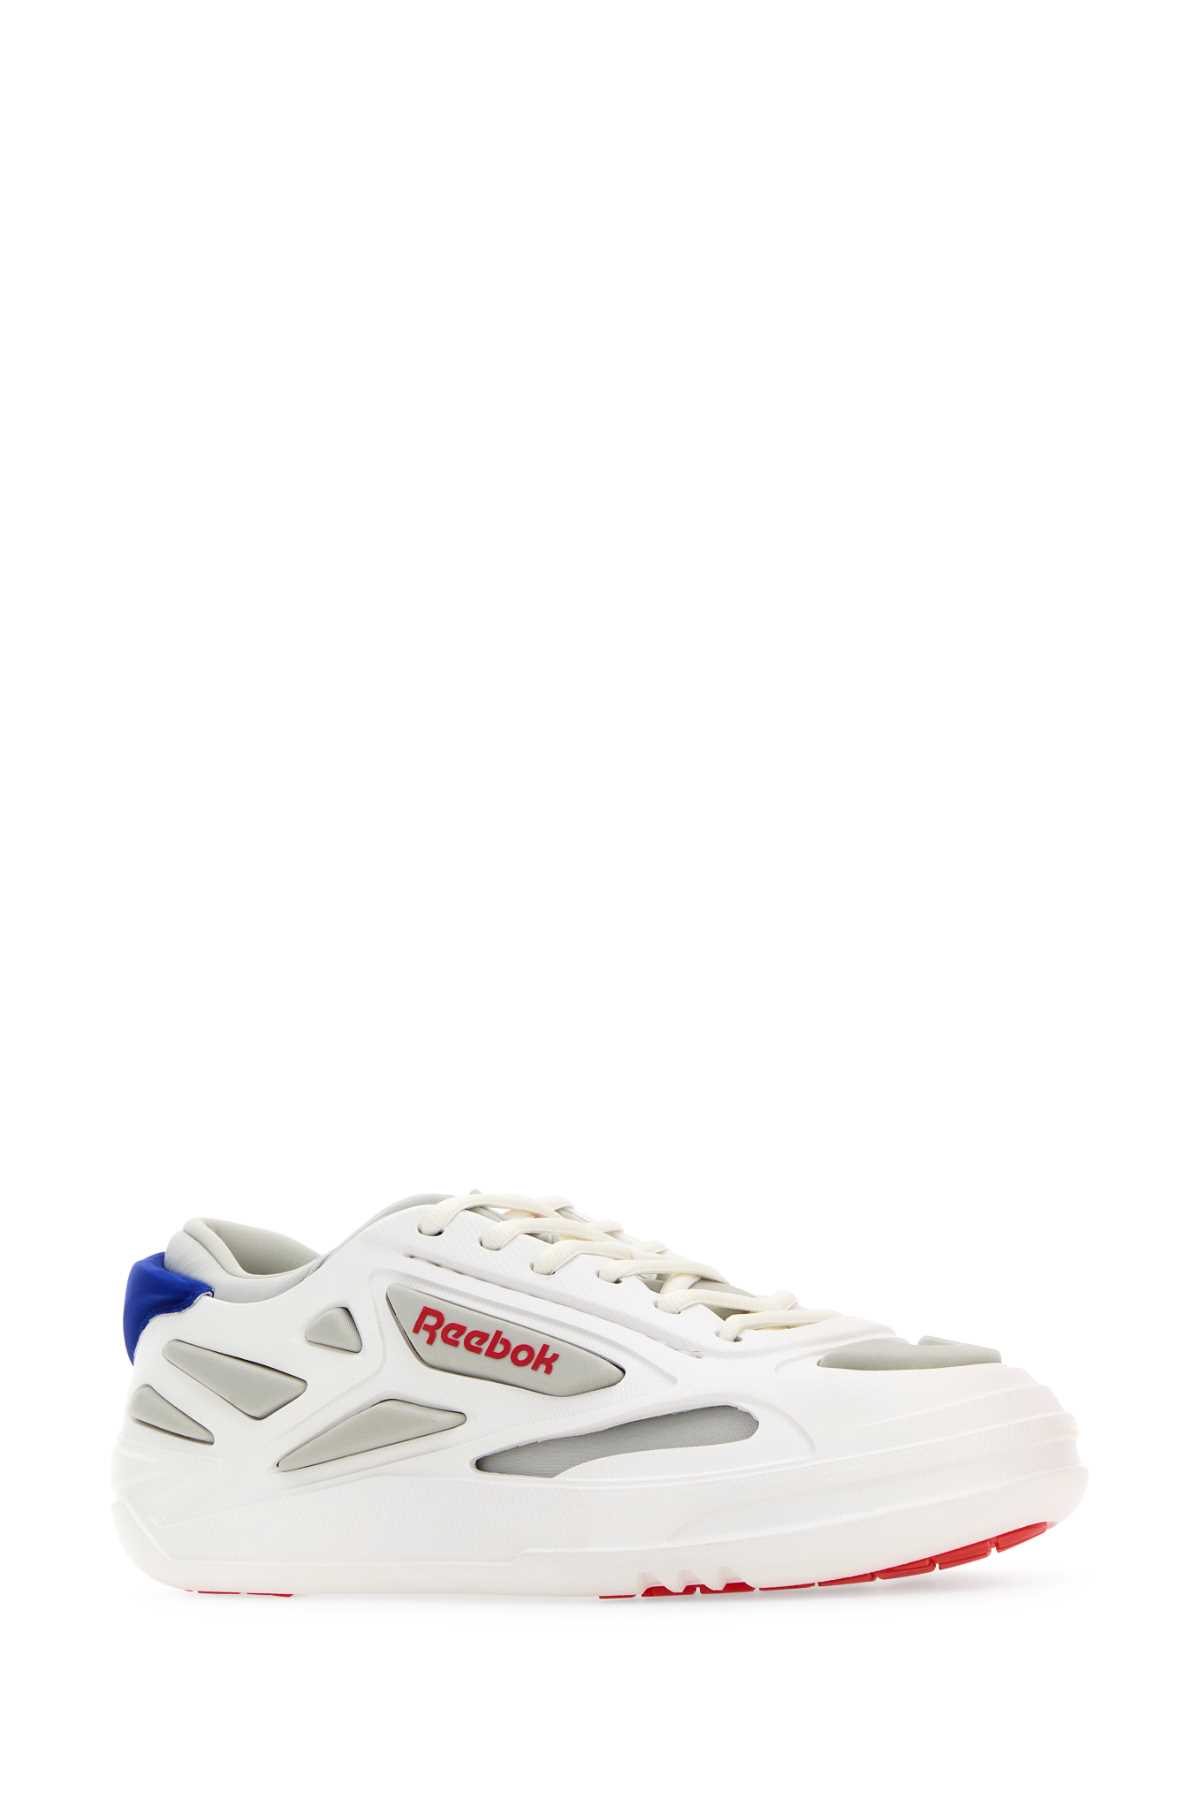 Shop Reebok Multicolor Fabric And Rubber Future Club C Sneakers In Blue